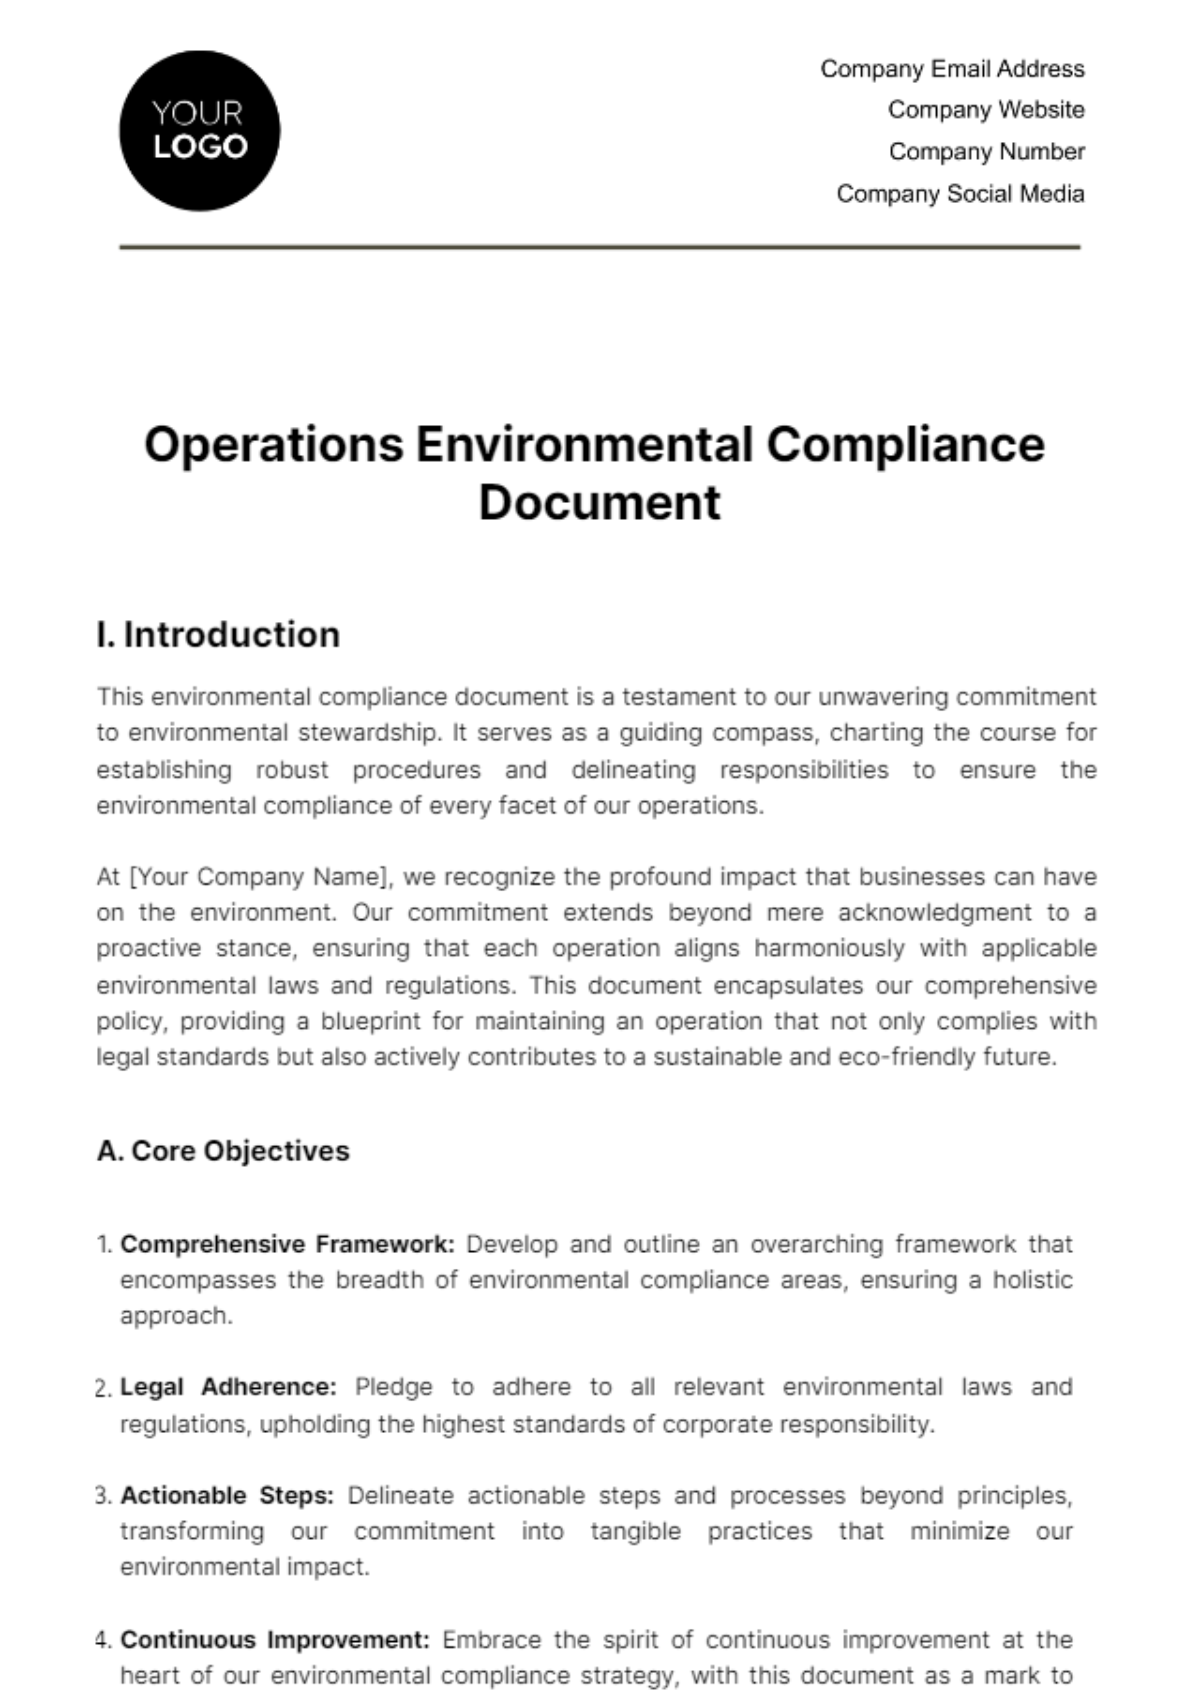 Free Operations Environmental Compliance Document Template